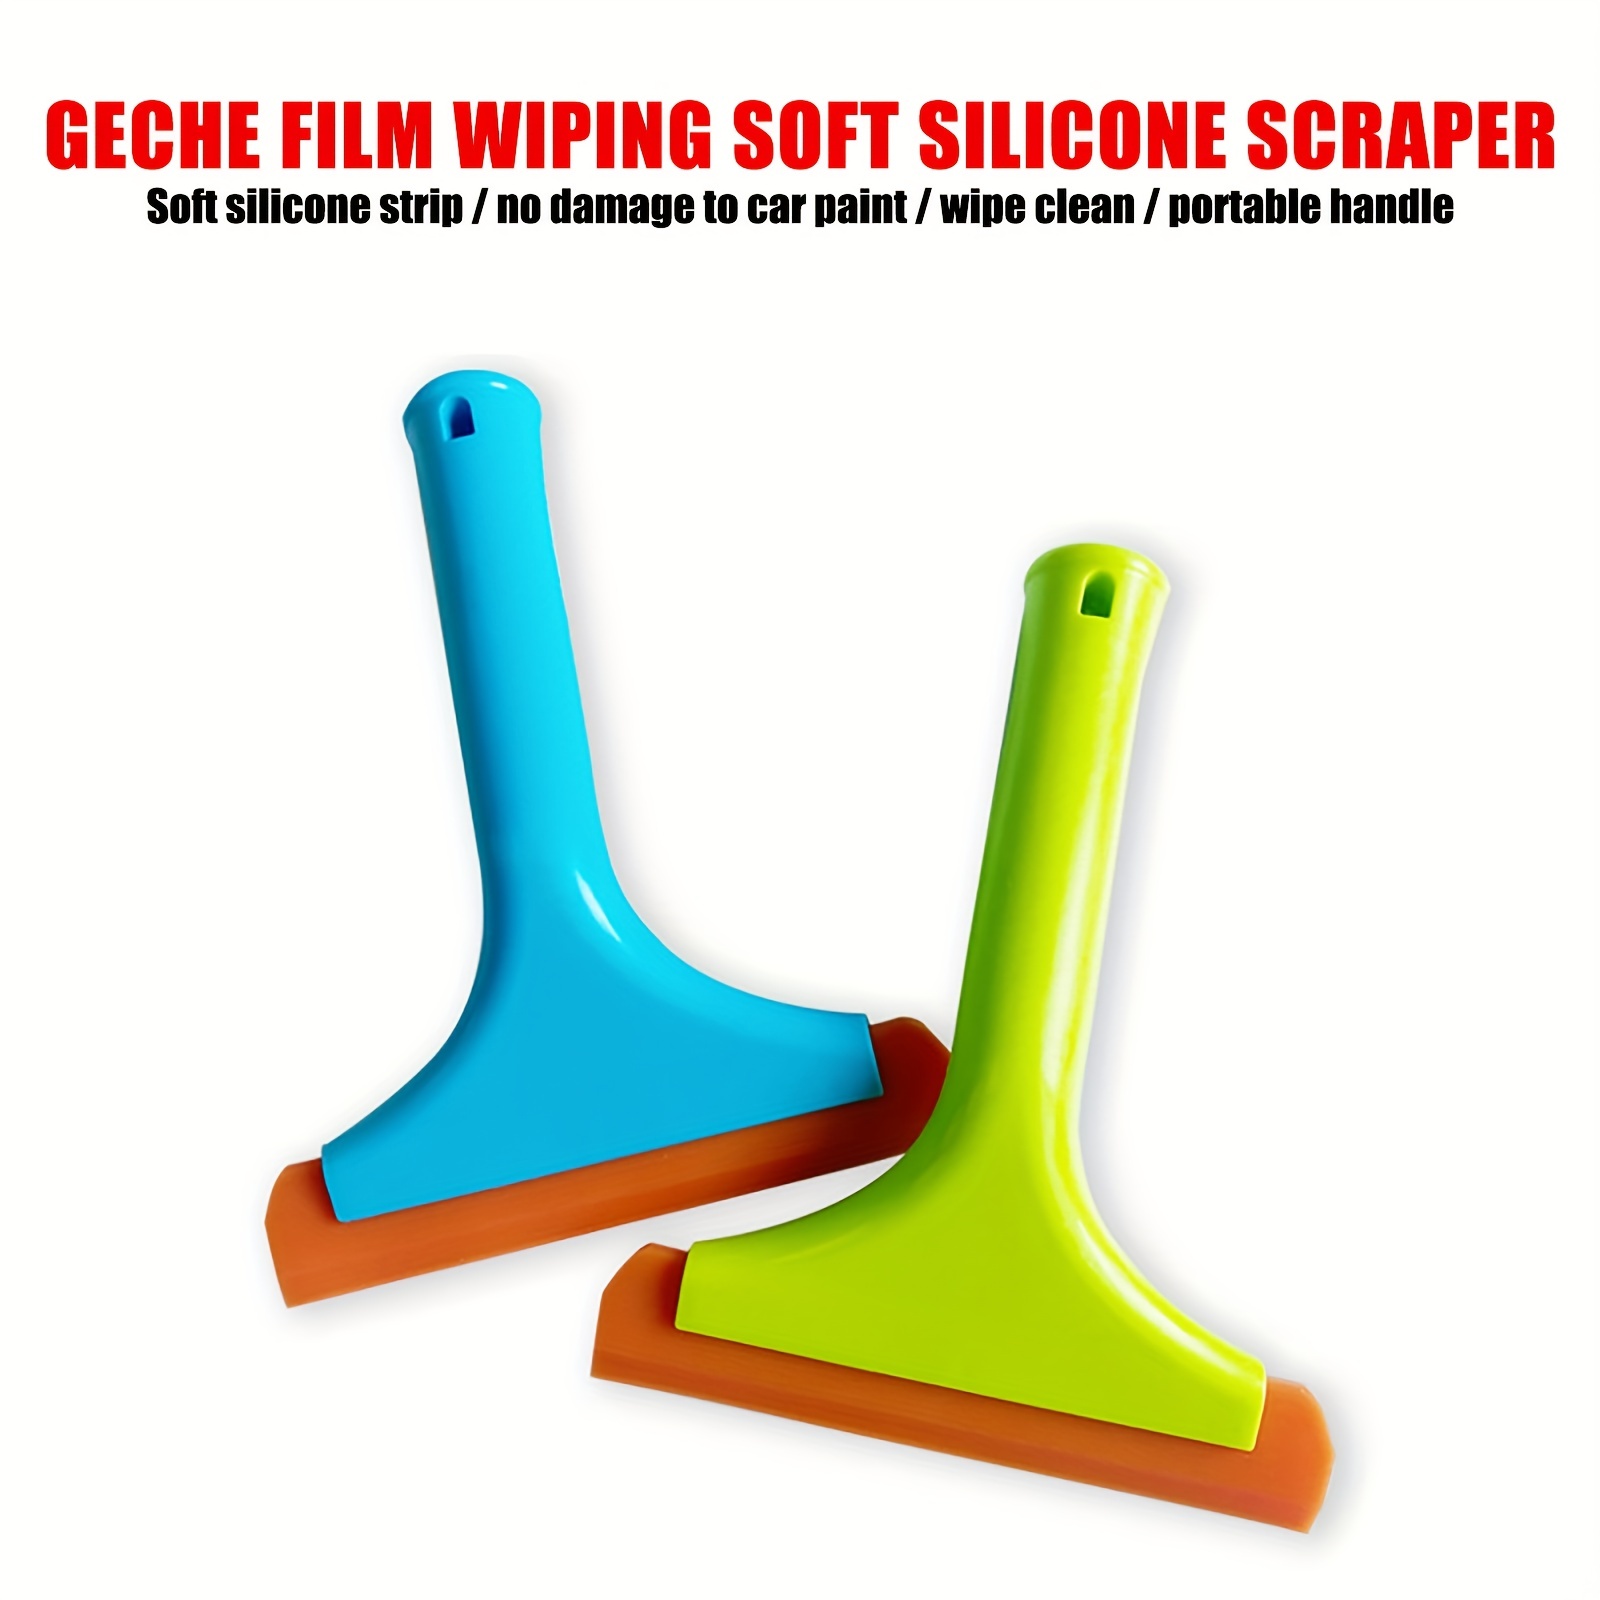 All-Purpose Squeegee for Car Window Squeegee for Shower Glass Door, Super Flexible Silicone Squeegee for Window Cleaning Small Squeegee for Car